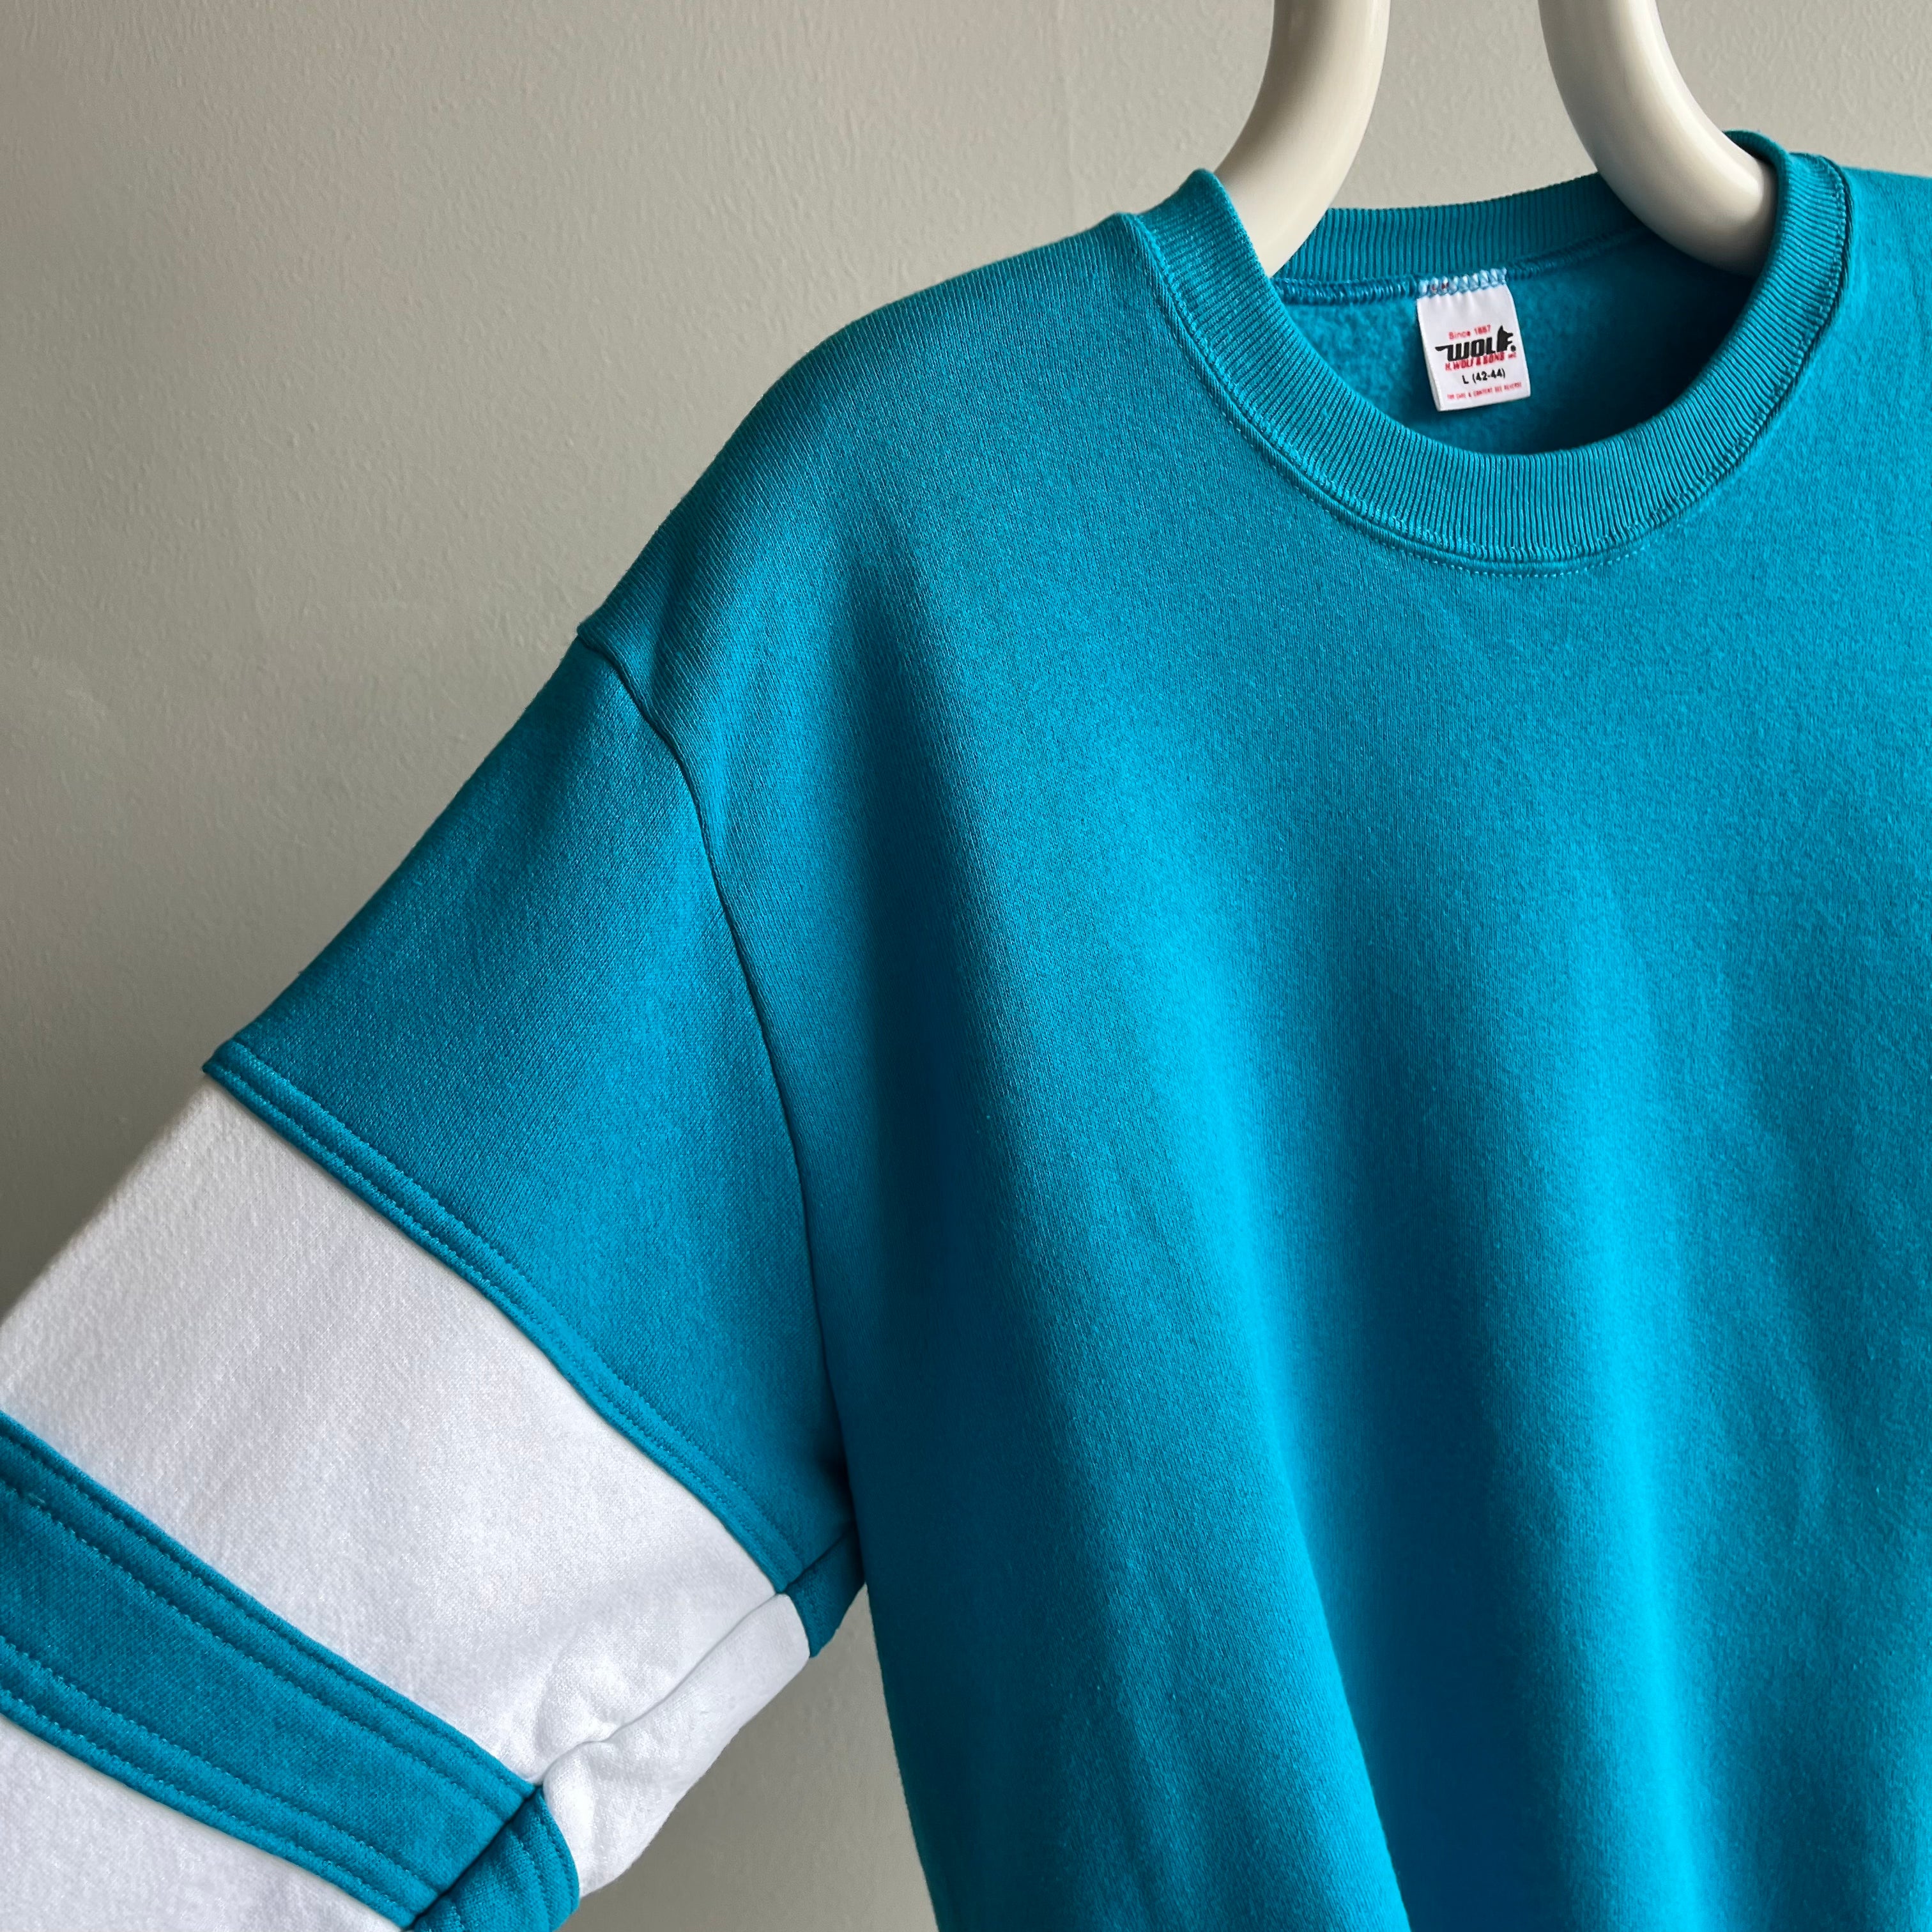 1980s Never? Worn Color Block Blue and White Sweatshirt by Wolf - Oh My